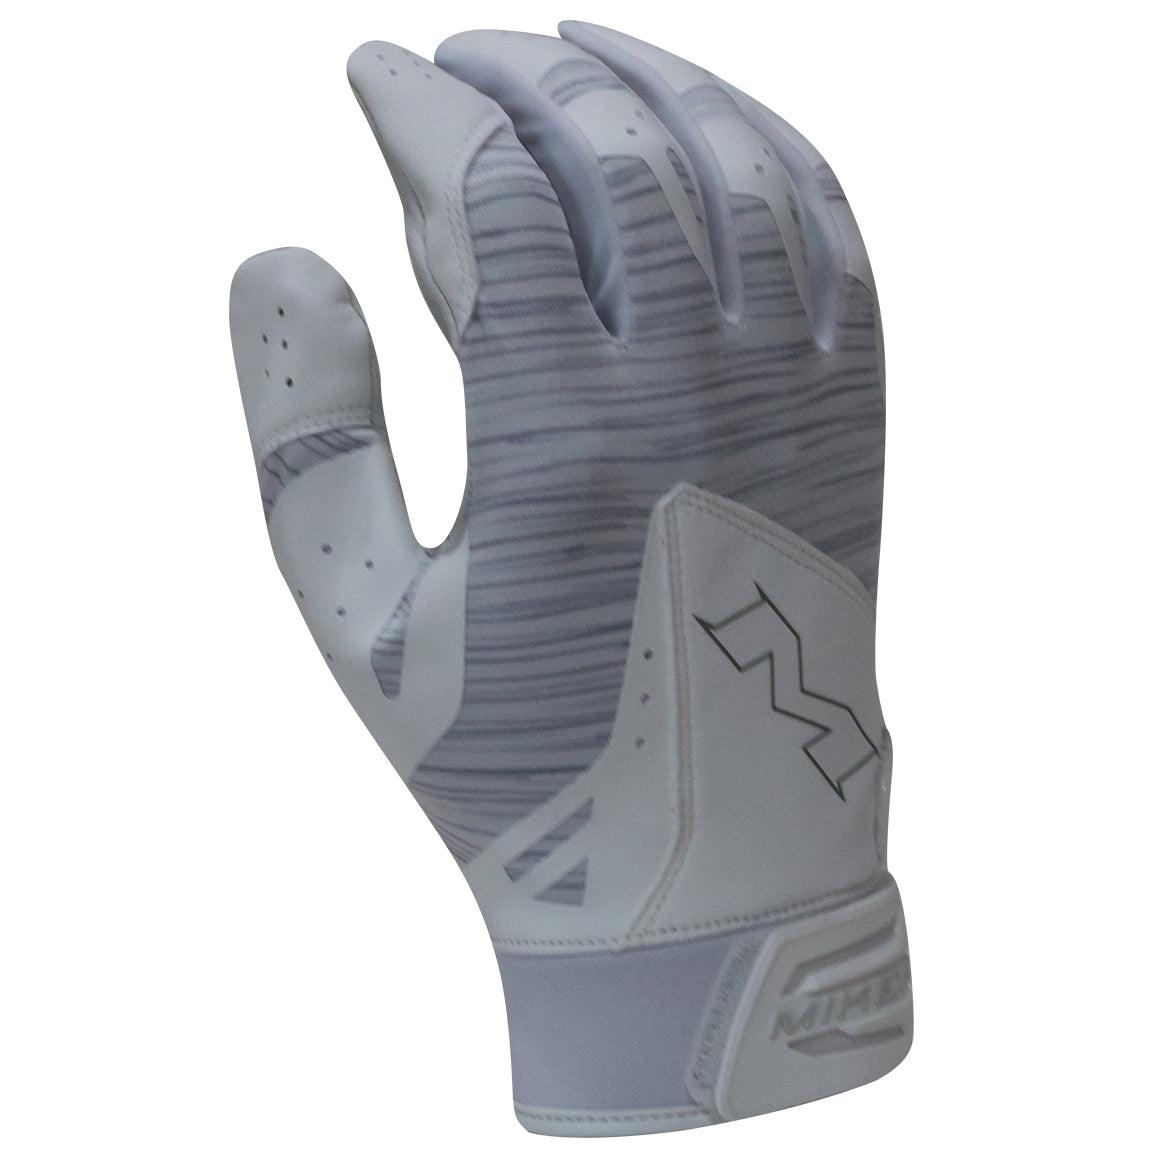 Pro Batting Gloves - Sports Excellence